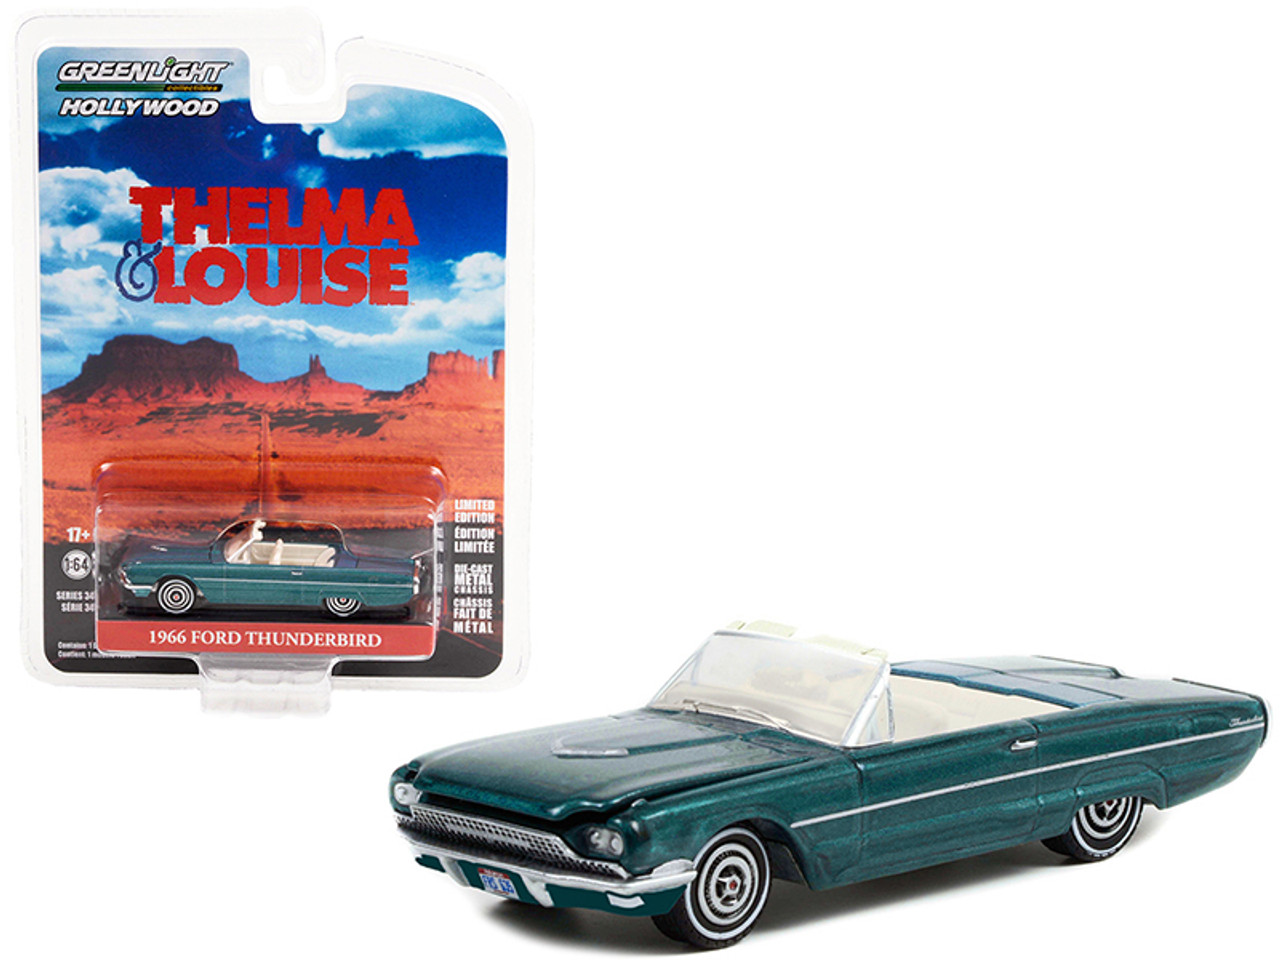 1966 Ford Thunderbird Convertible Blue Metallic "Thelma & Louise" (1991) Movie "Hollywood Series" Release 34 1/64 Diecast Model Car by Greenlight